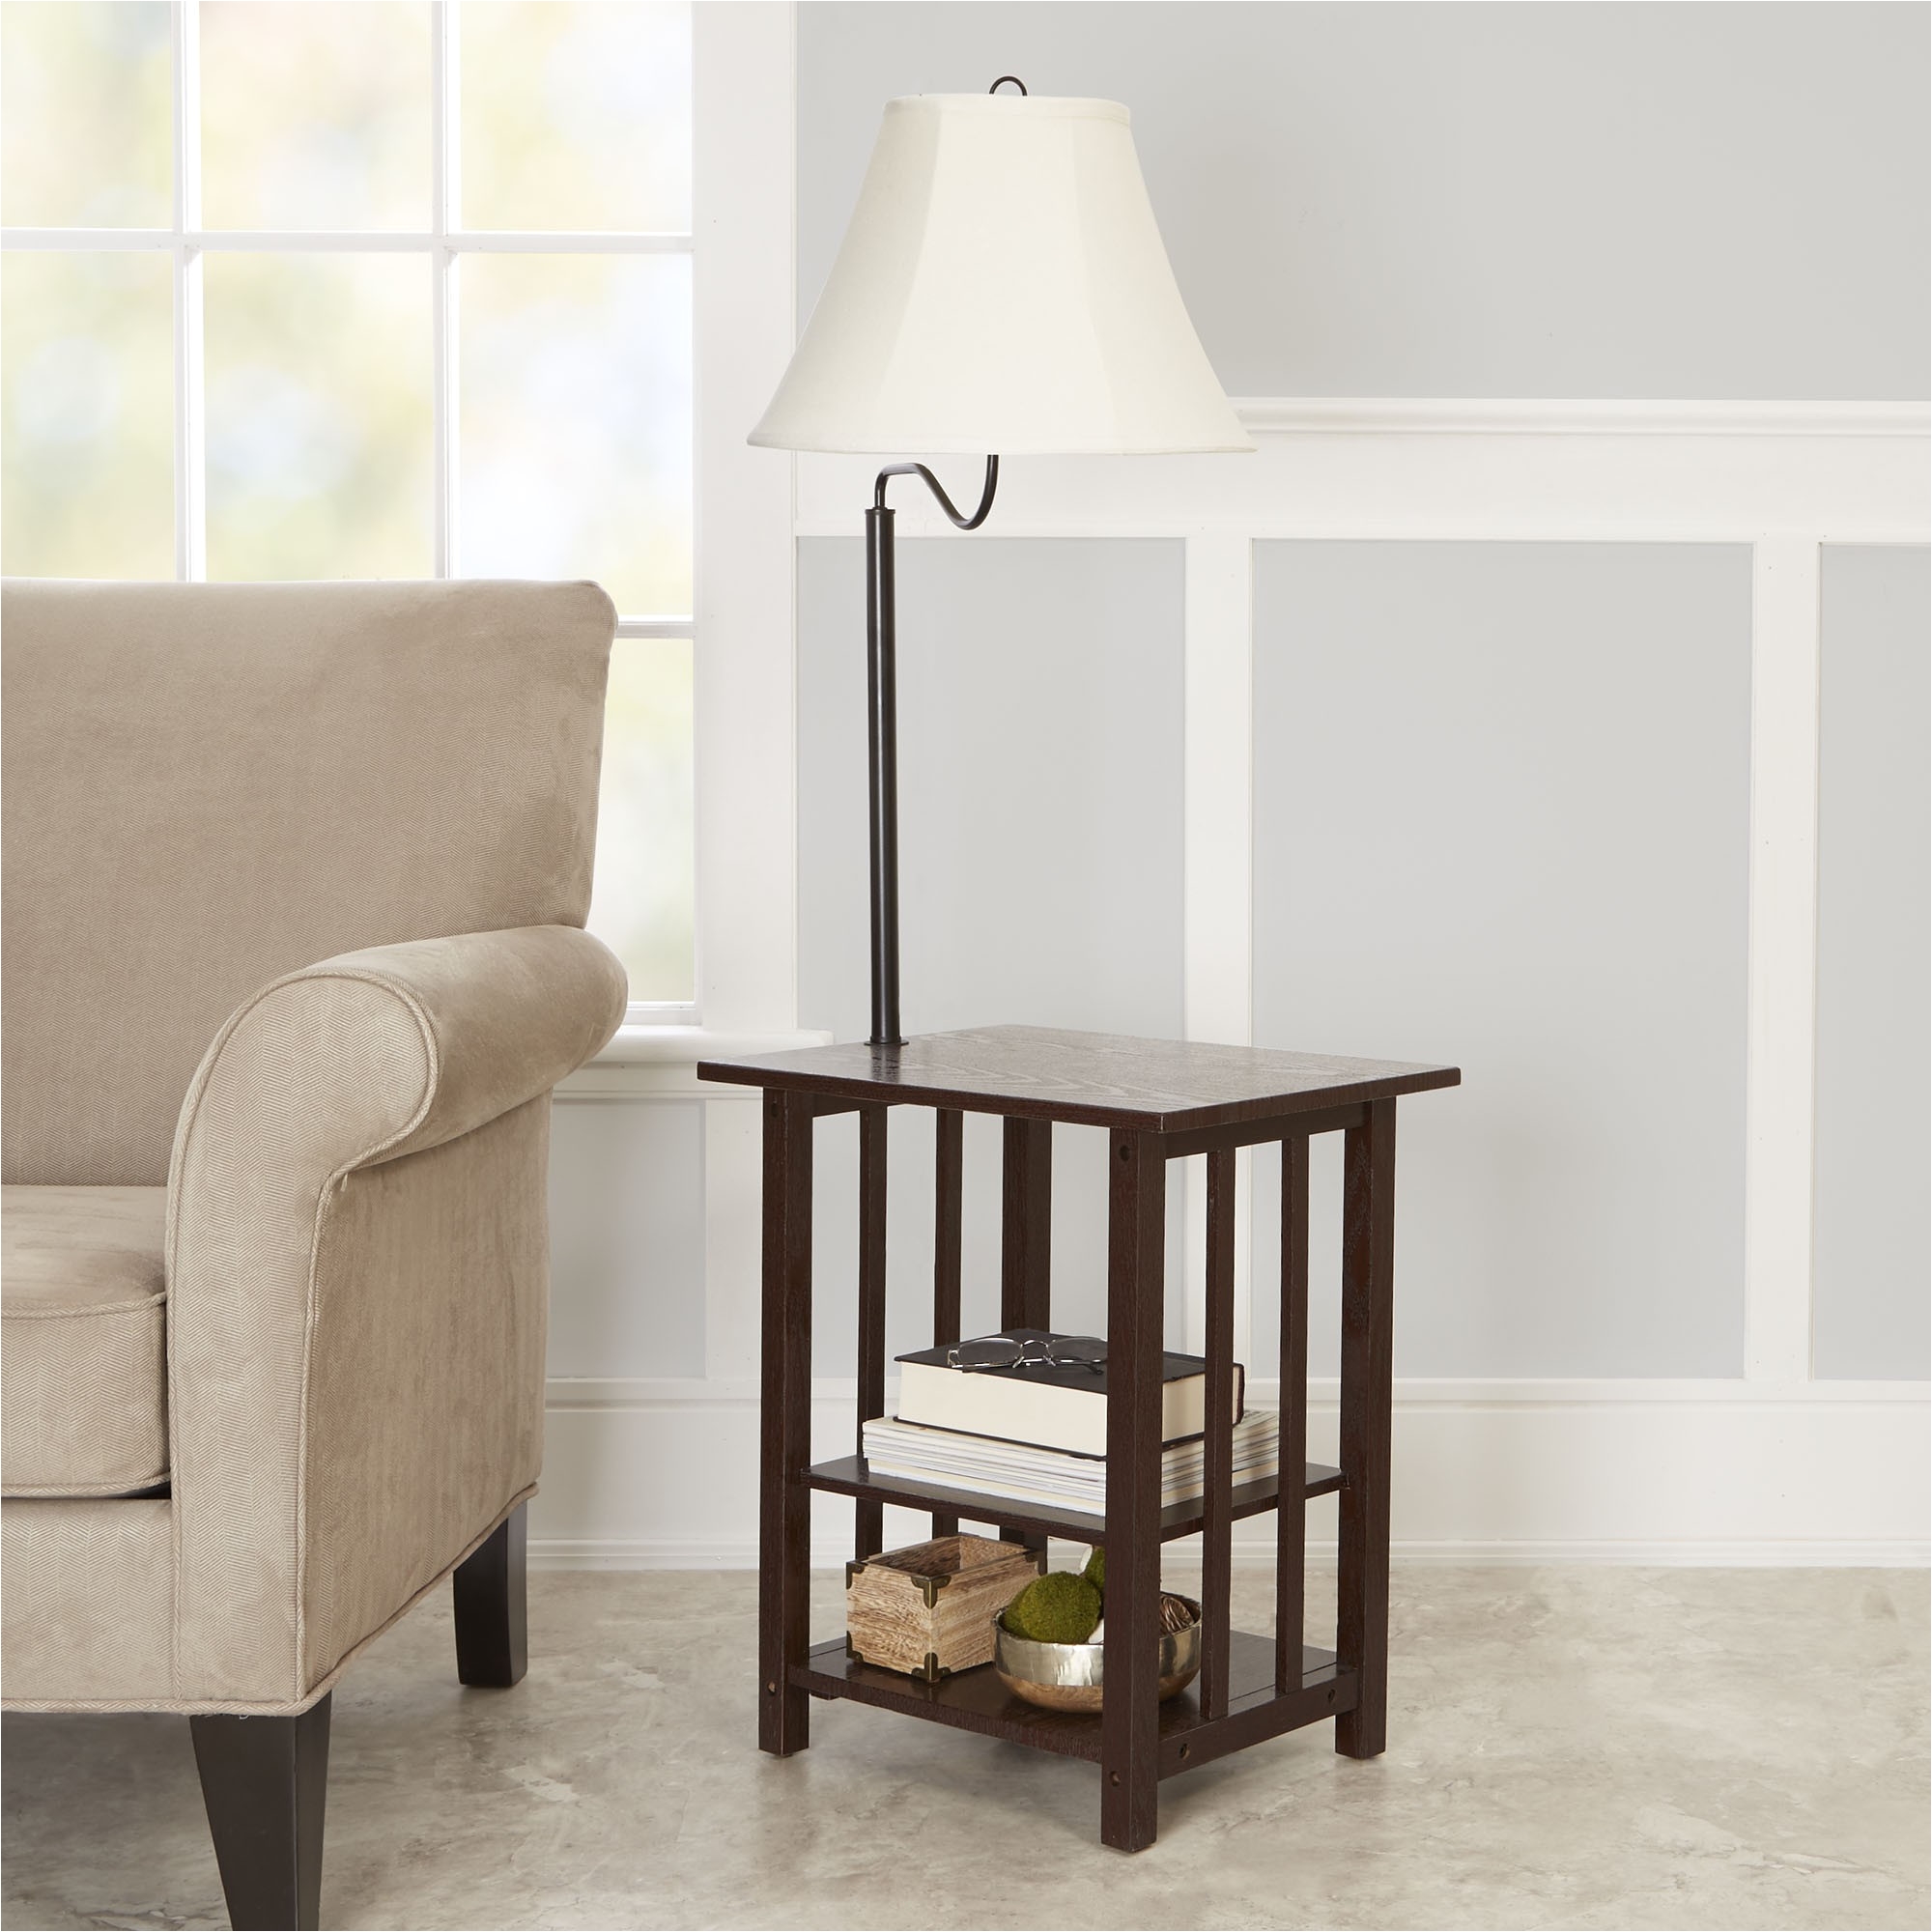 end table with attached lamp and magazine rack luxury awesome end table with lamp attached of